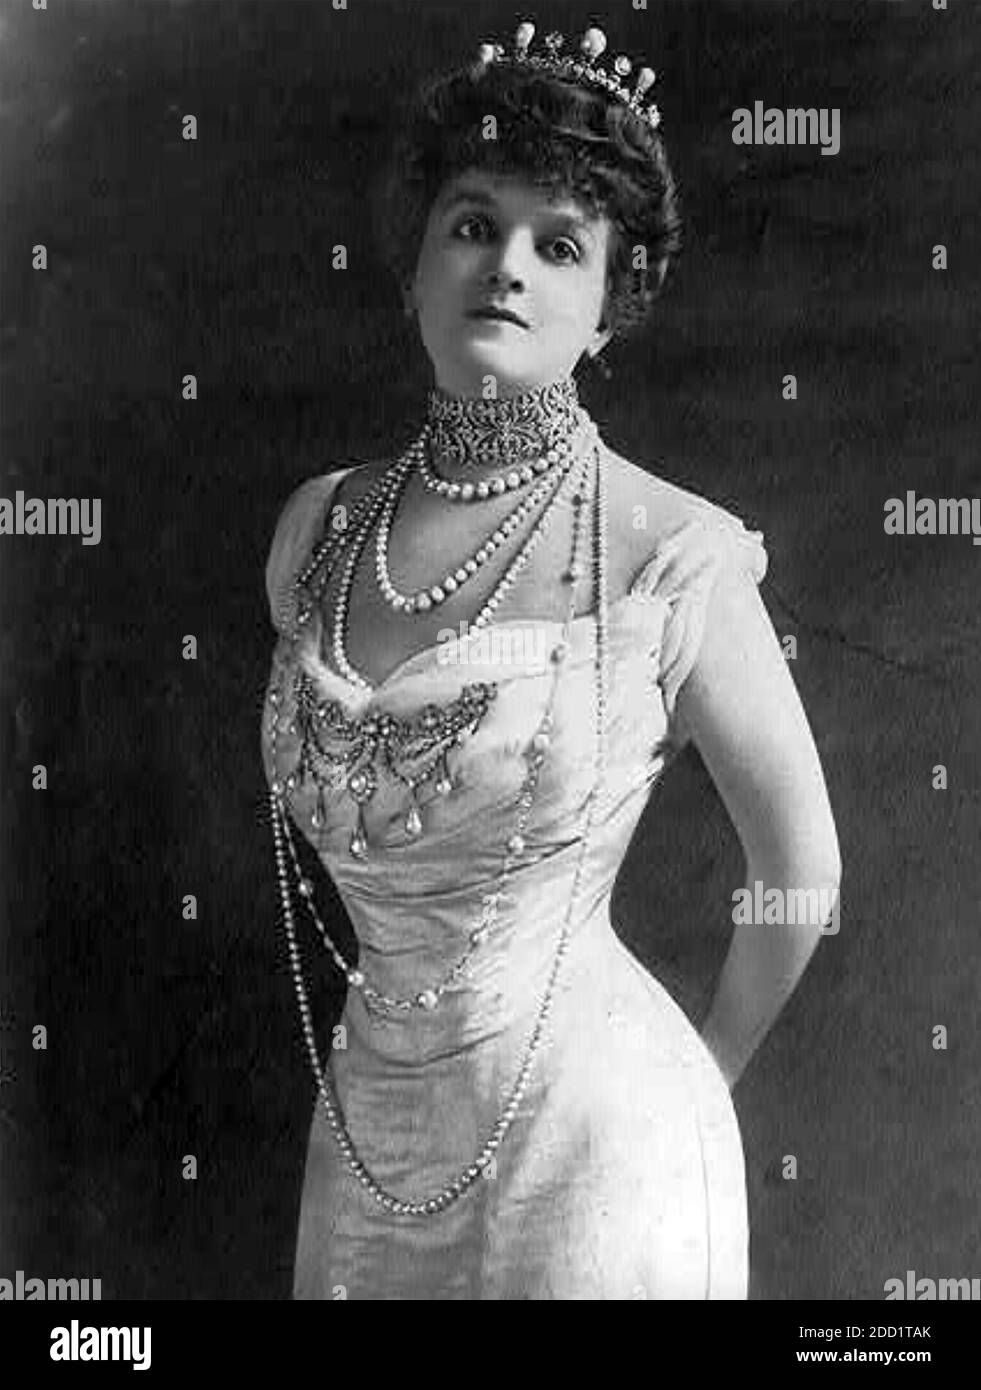 EDITH KINGDON (1864-1921) American stage actress in 1903. She married financier and railroad executive George Jay Gould in 1885. Stock Photo